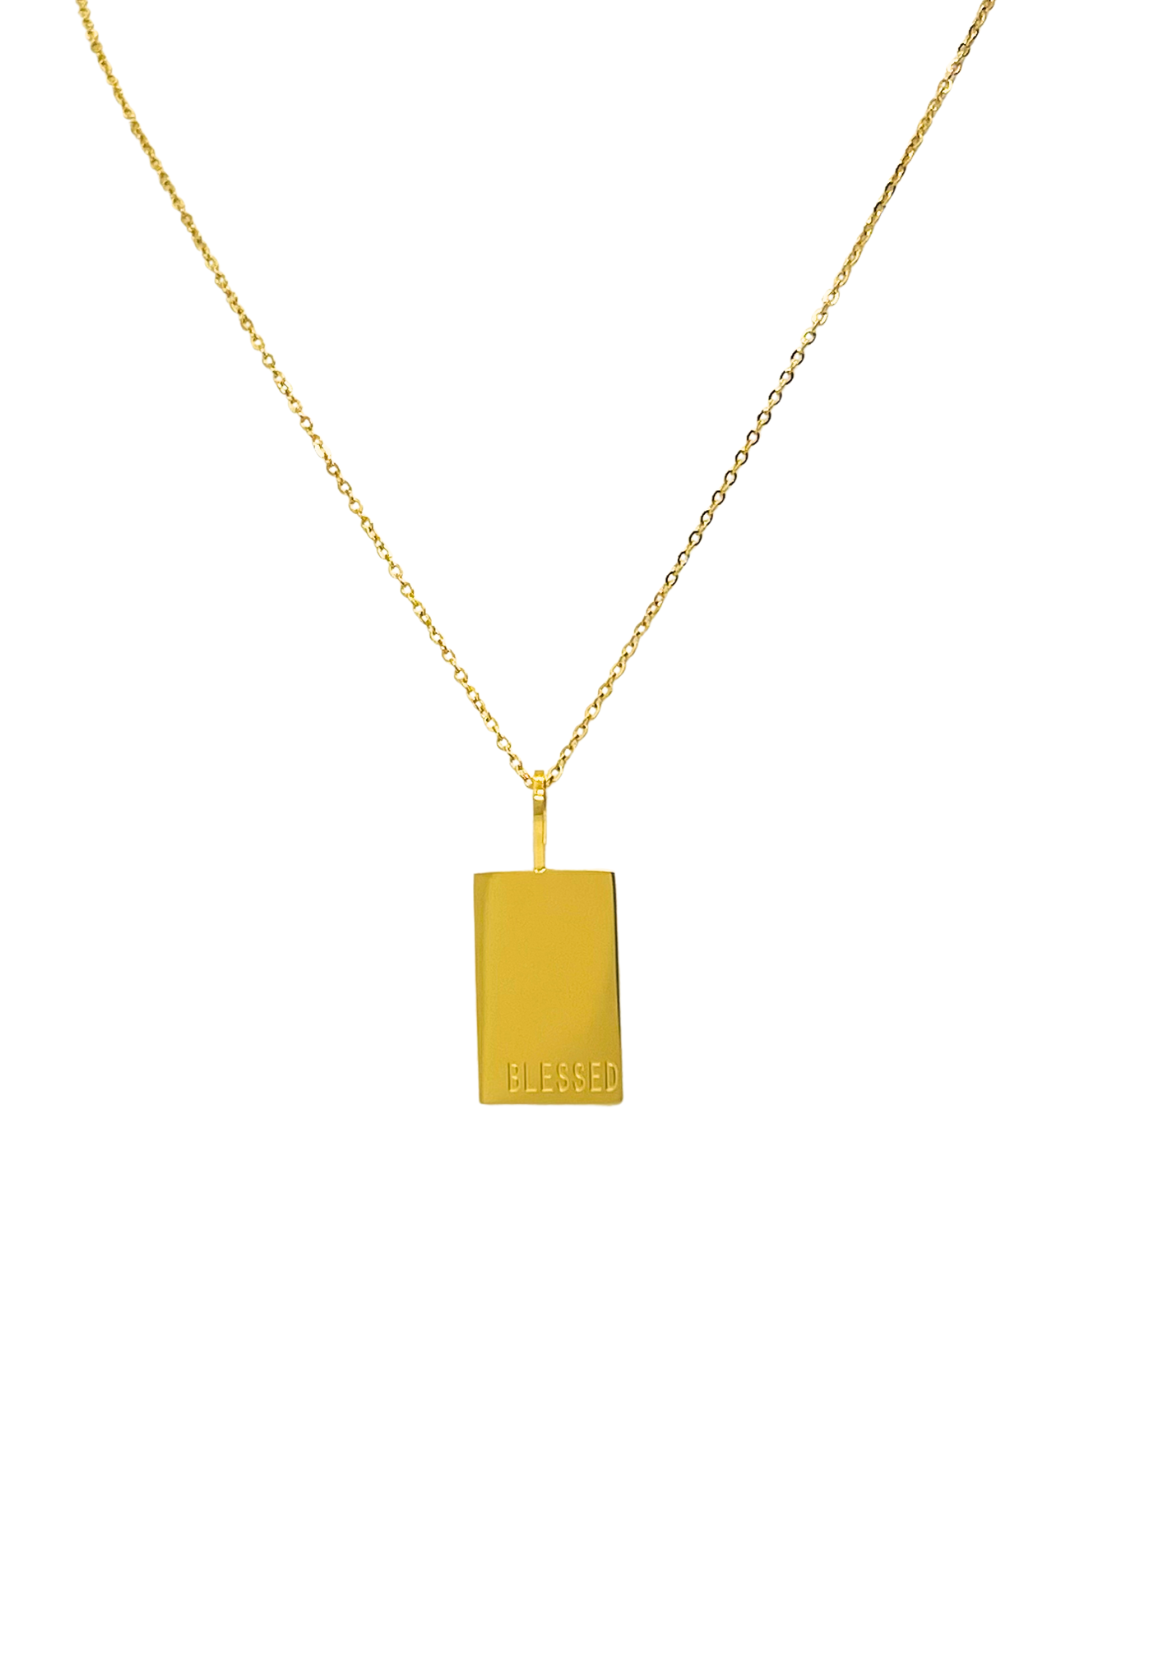 The Blessed Tag Gold Necklace